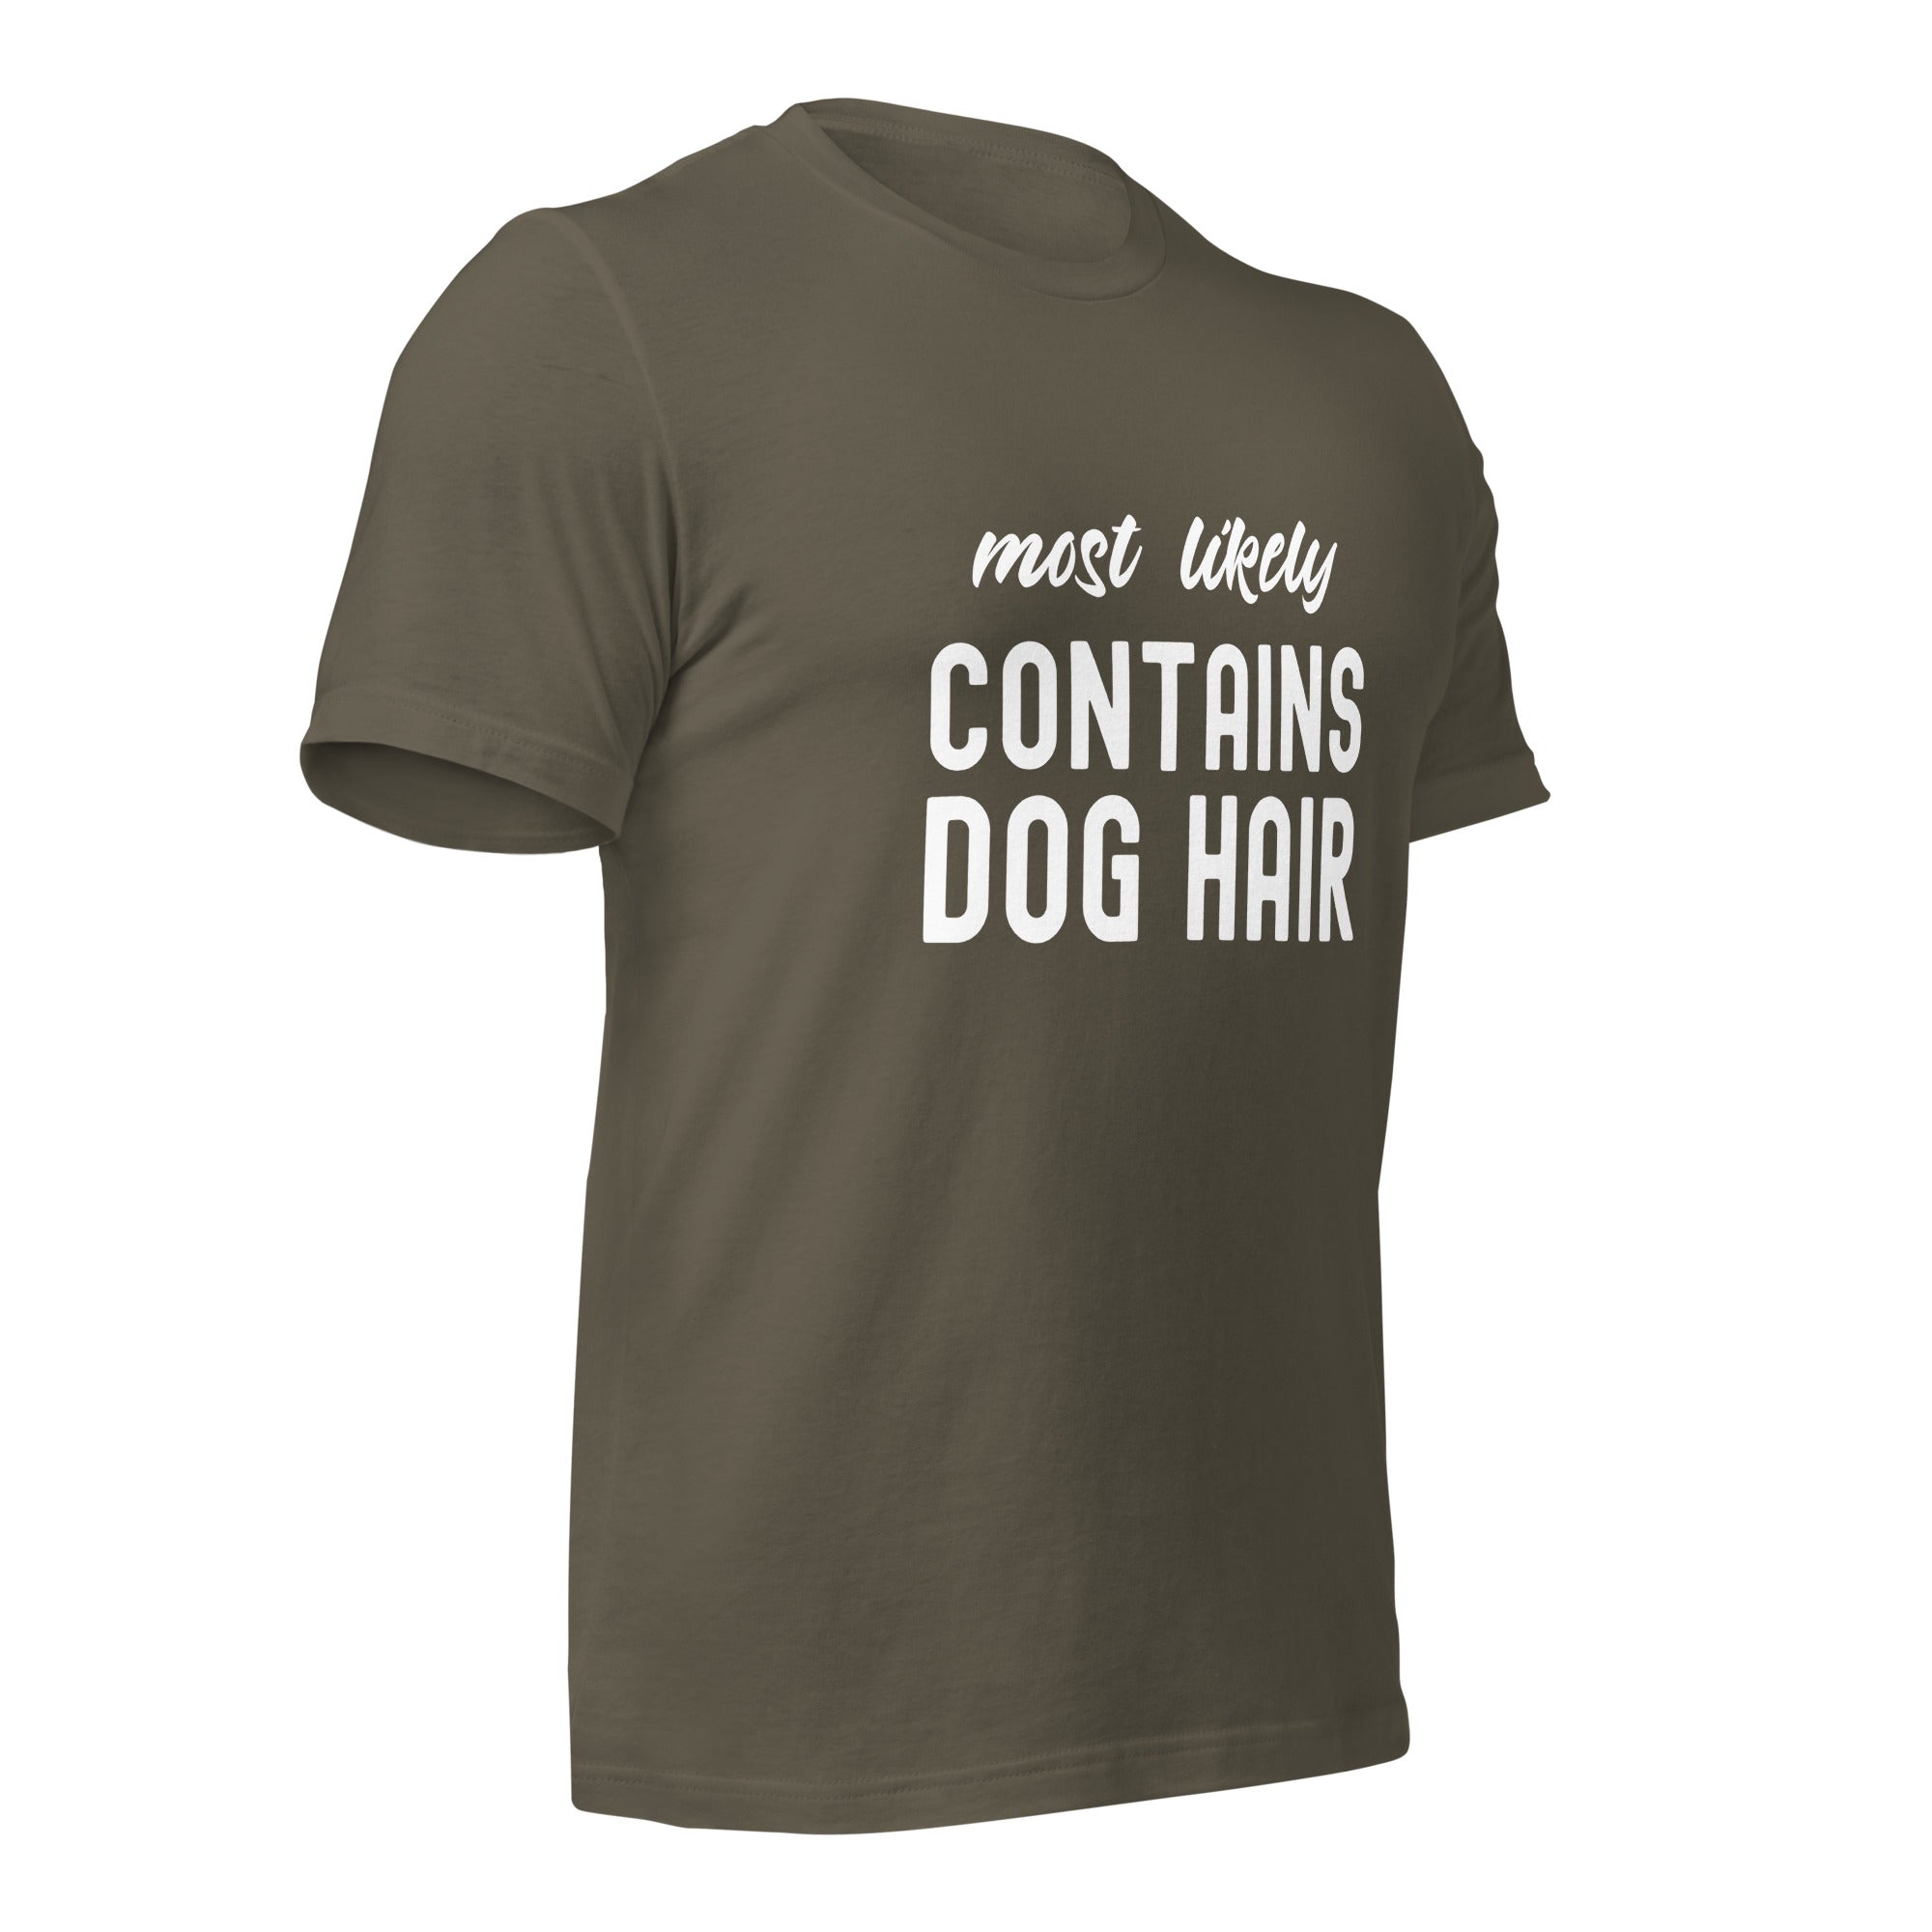 Unisex t-shirt | Most Likely Contains Dog Hair